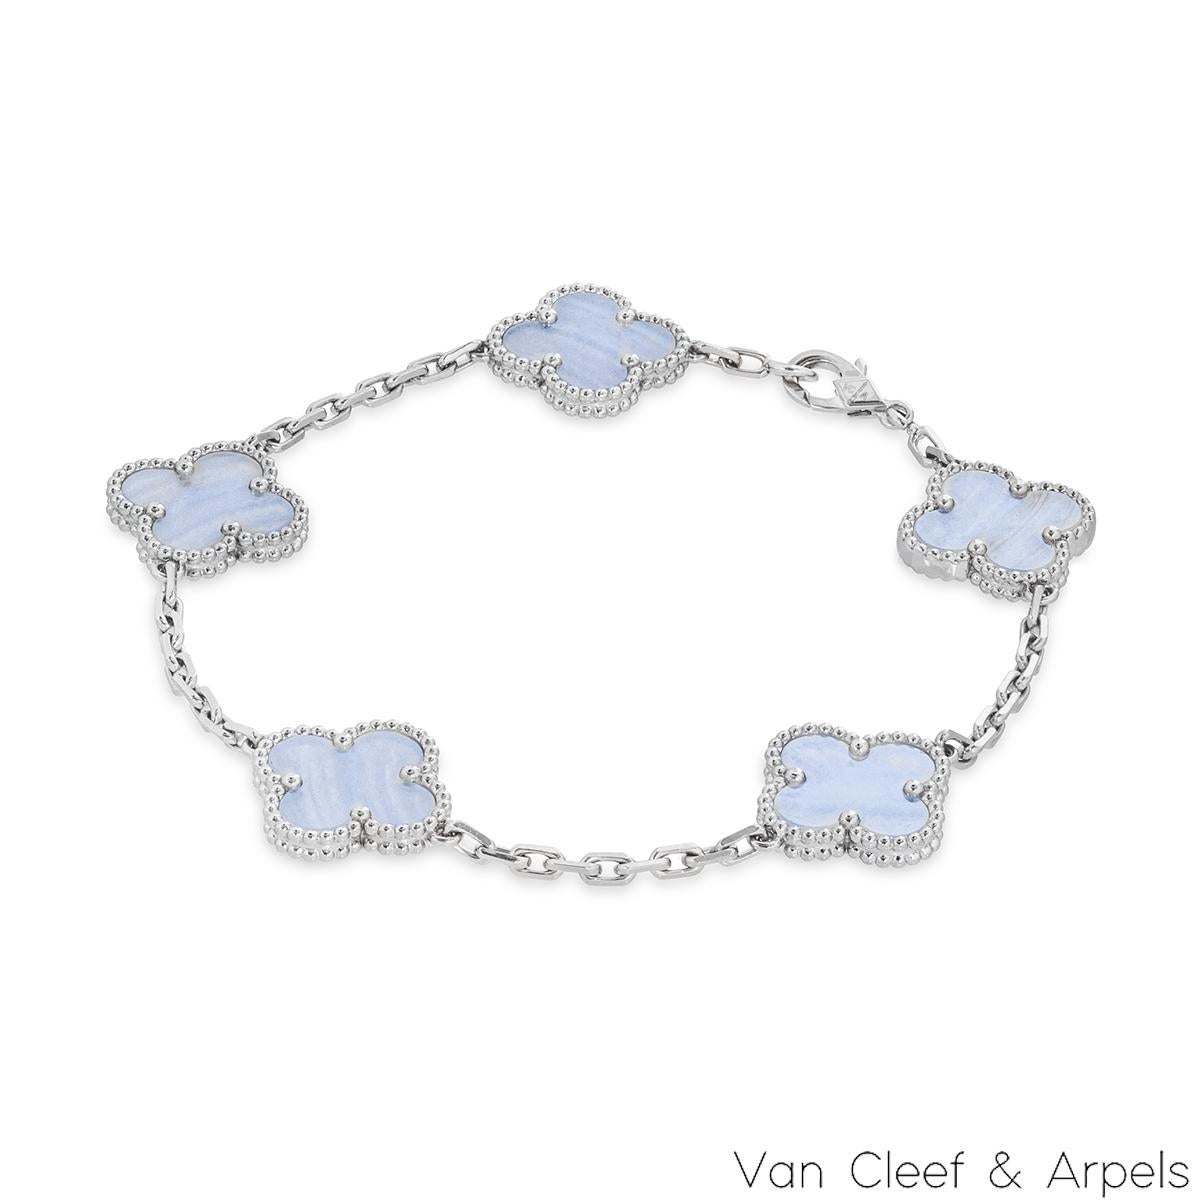 An 18k white gold bracelet from the Vintage Alhambra collection, by Van Cleef and Arpels. The bracelet is made up of 5 iconic clover motifs, each set with a beaded edge and a chalcedony inlay, set throughout the length of the chain. Measuring 7.5